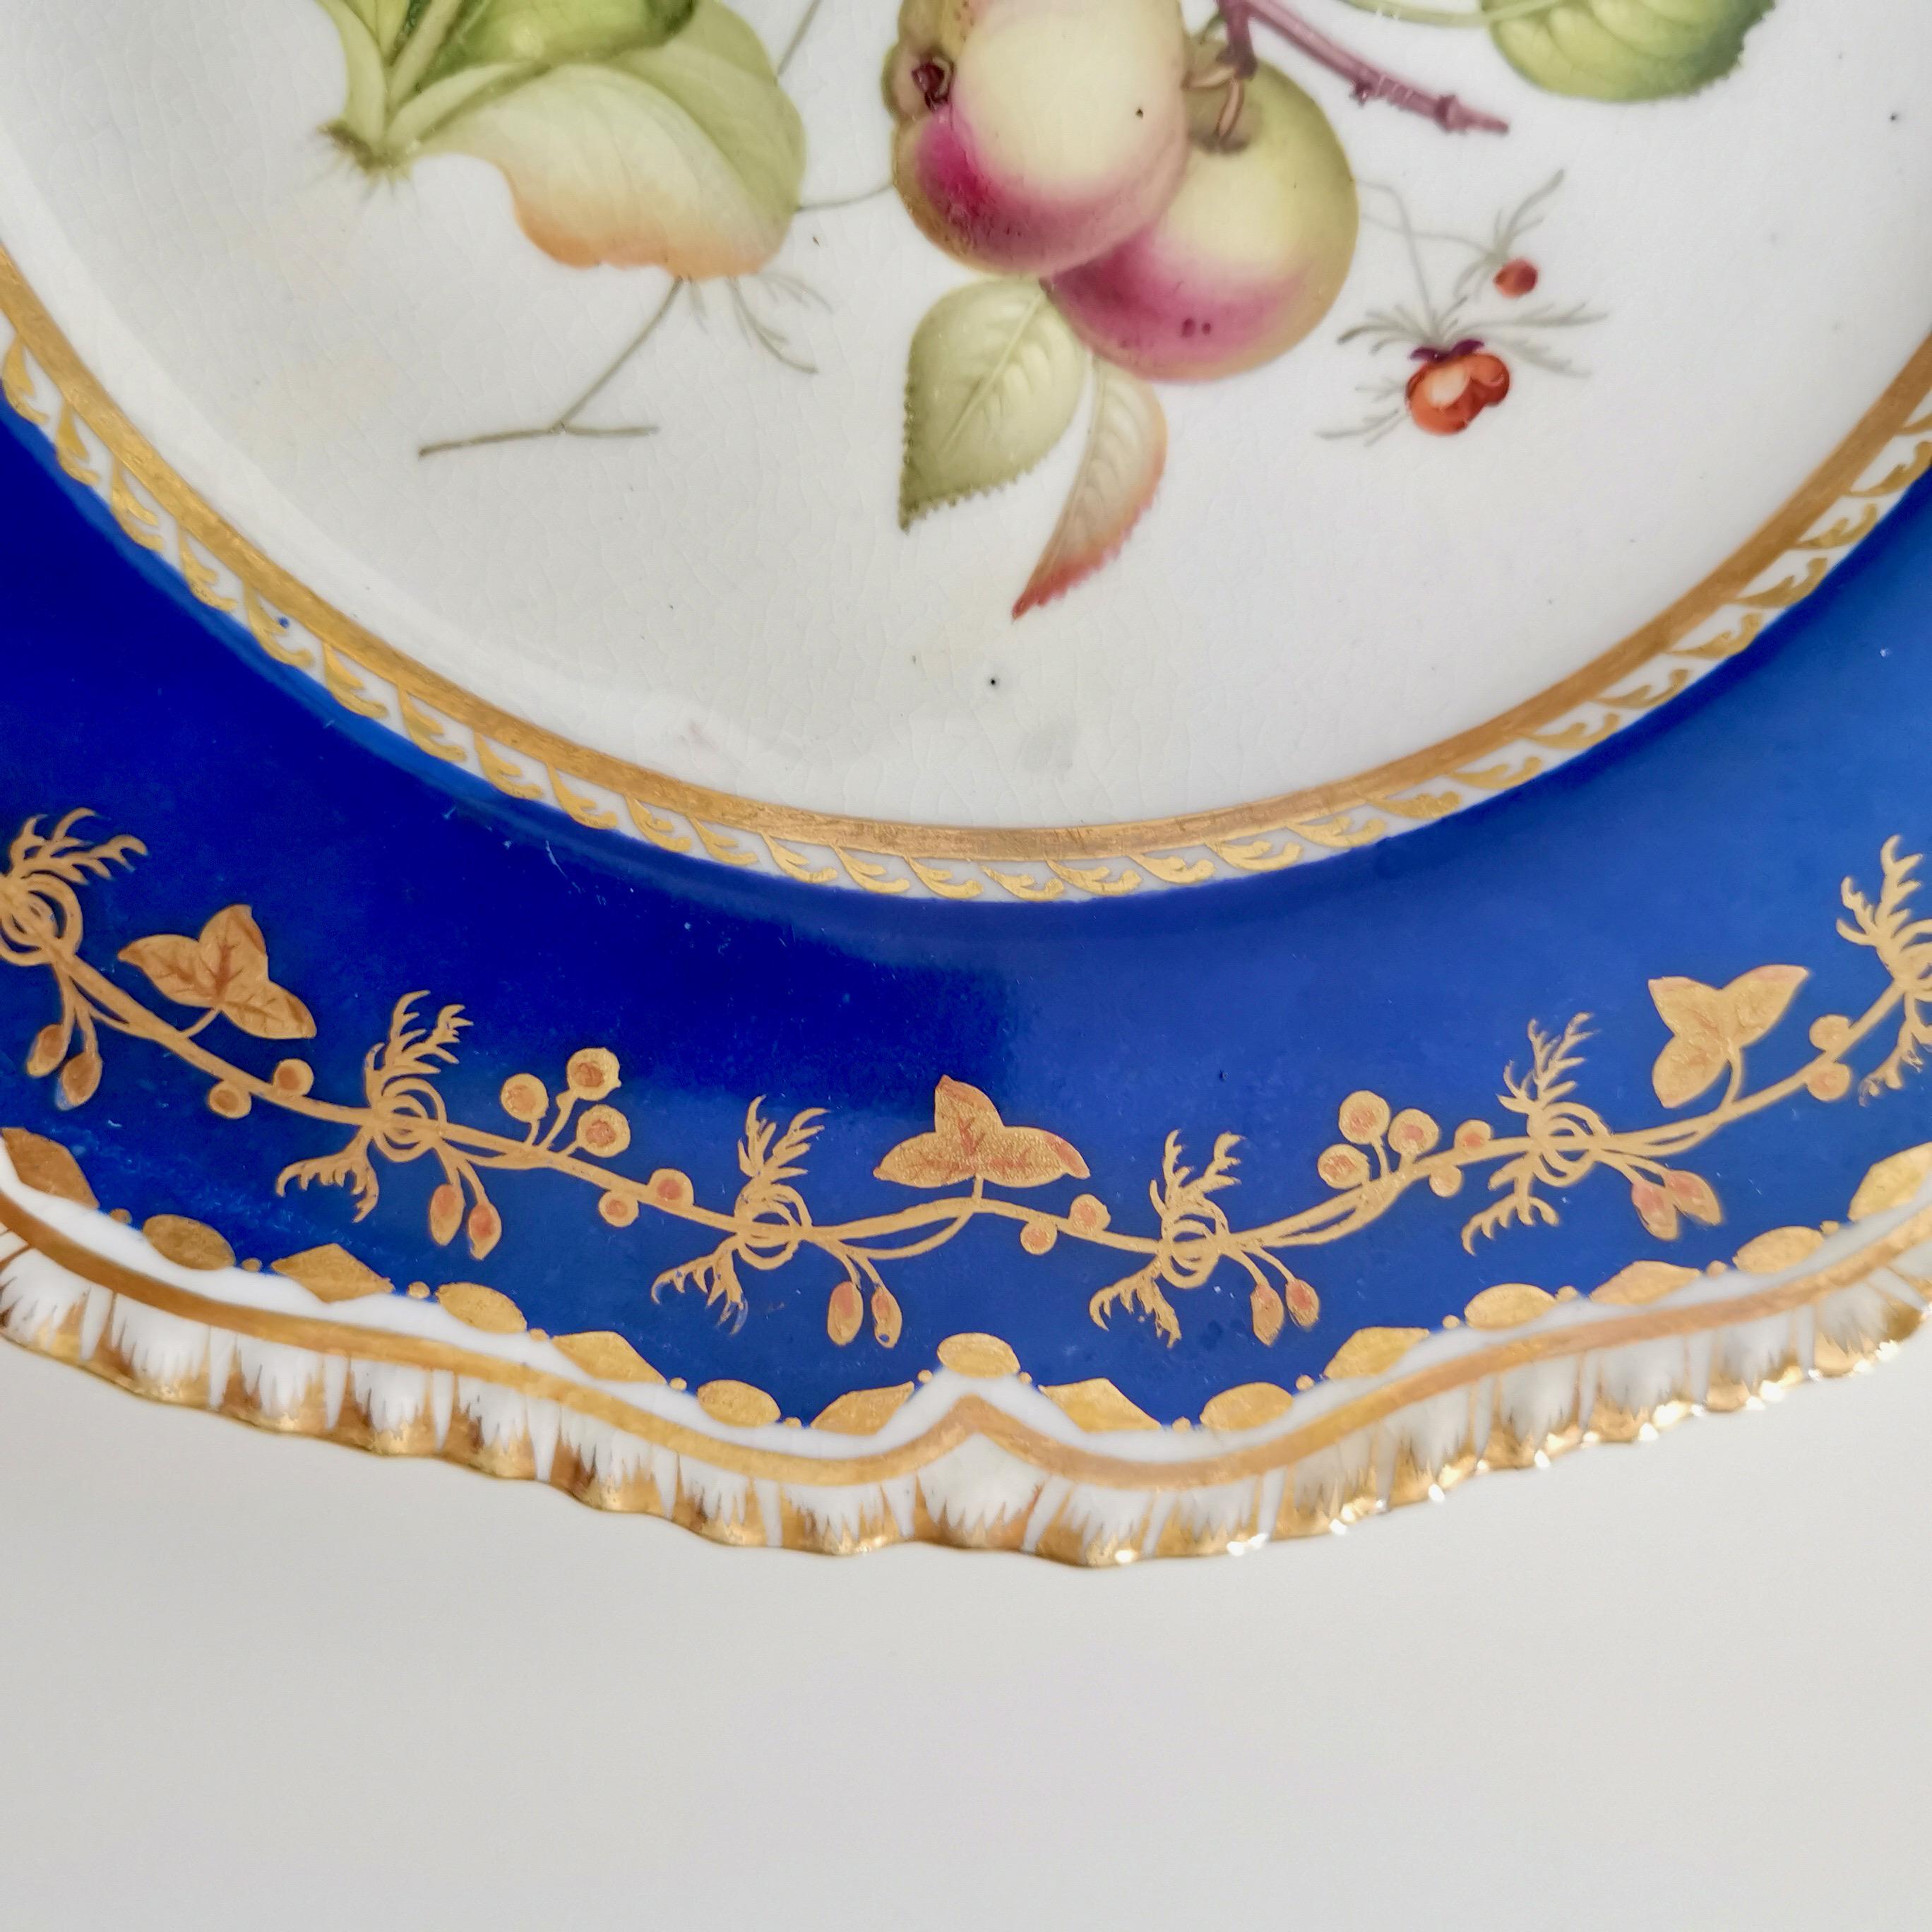 Mid-19th Century Coalport Porcelain Plate, Blue with Auriculas and Apples, ca 1830